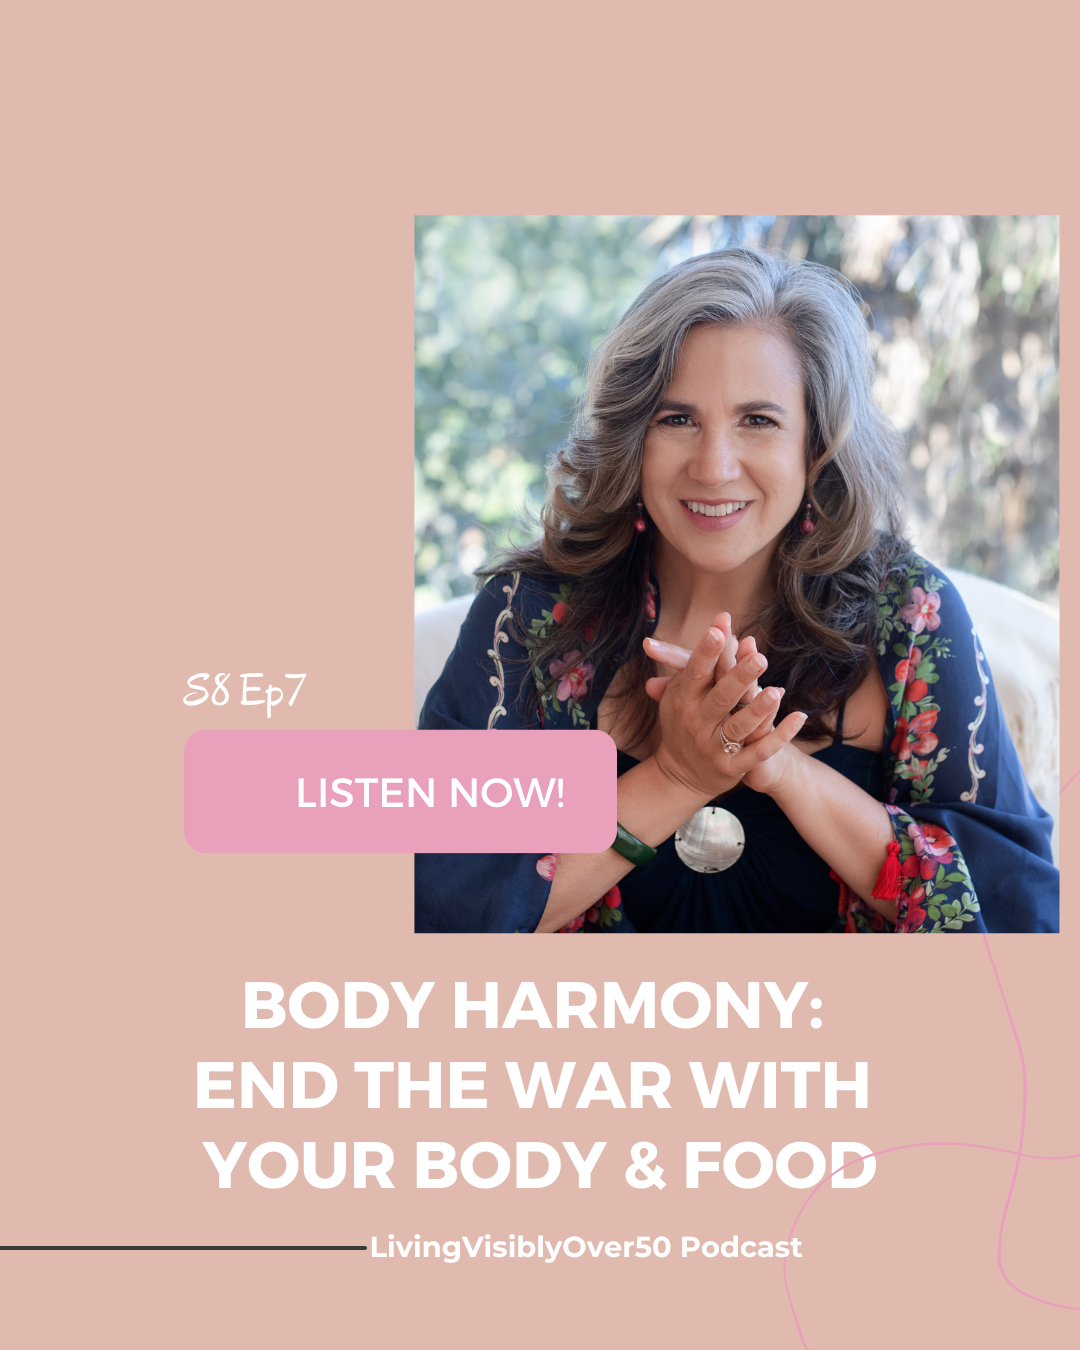 Living Visibly Over 50 podcast. Body Harmony: End the War With Your Body & Food - S8 Ep7.